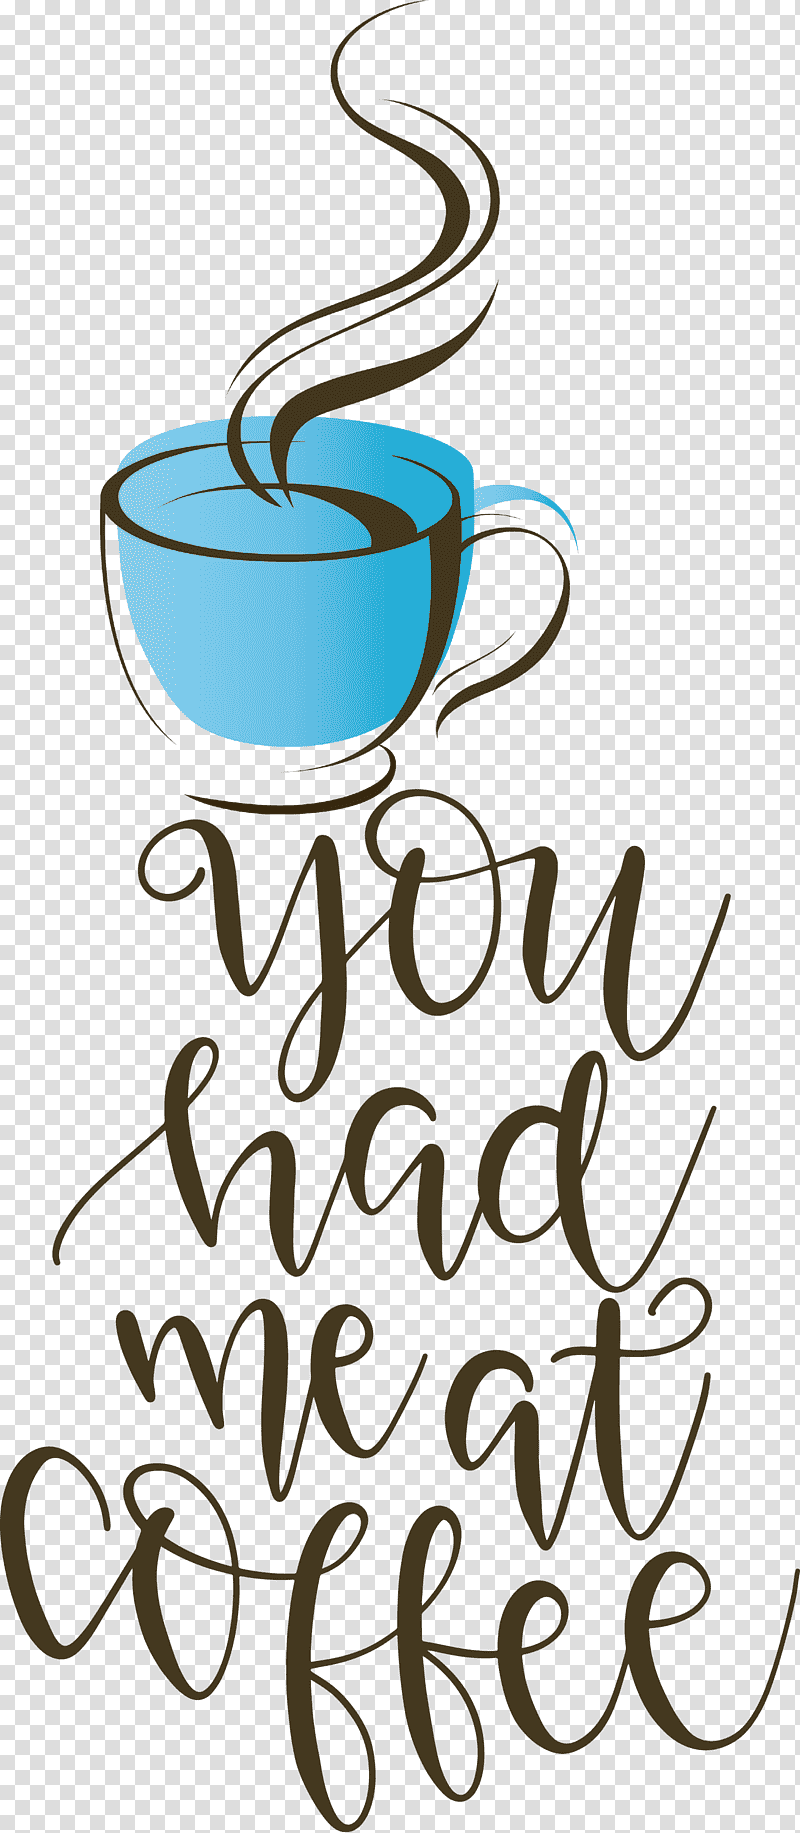 Coffee Coffee Quote, Logo, Calligraphy, Meter, Line, Teal, Coffee Service transparent background PNG clipart